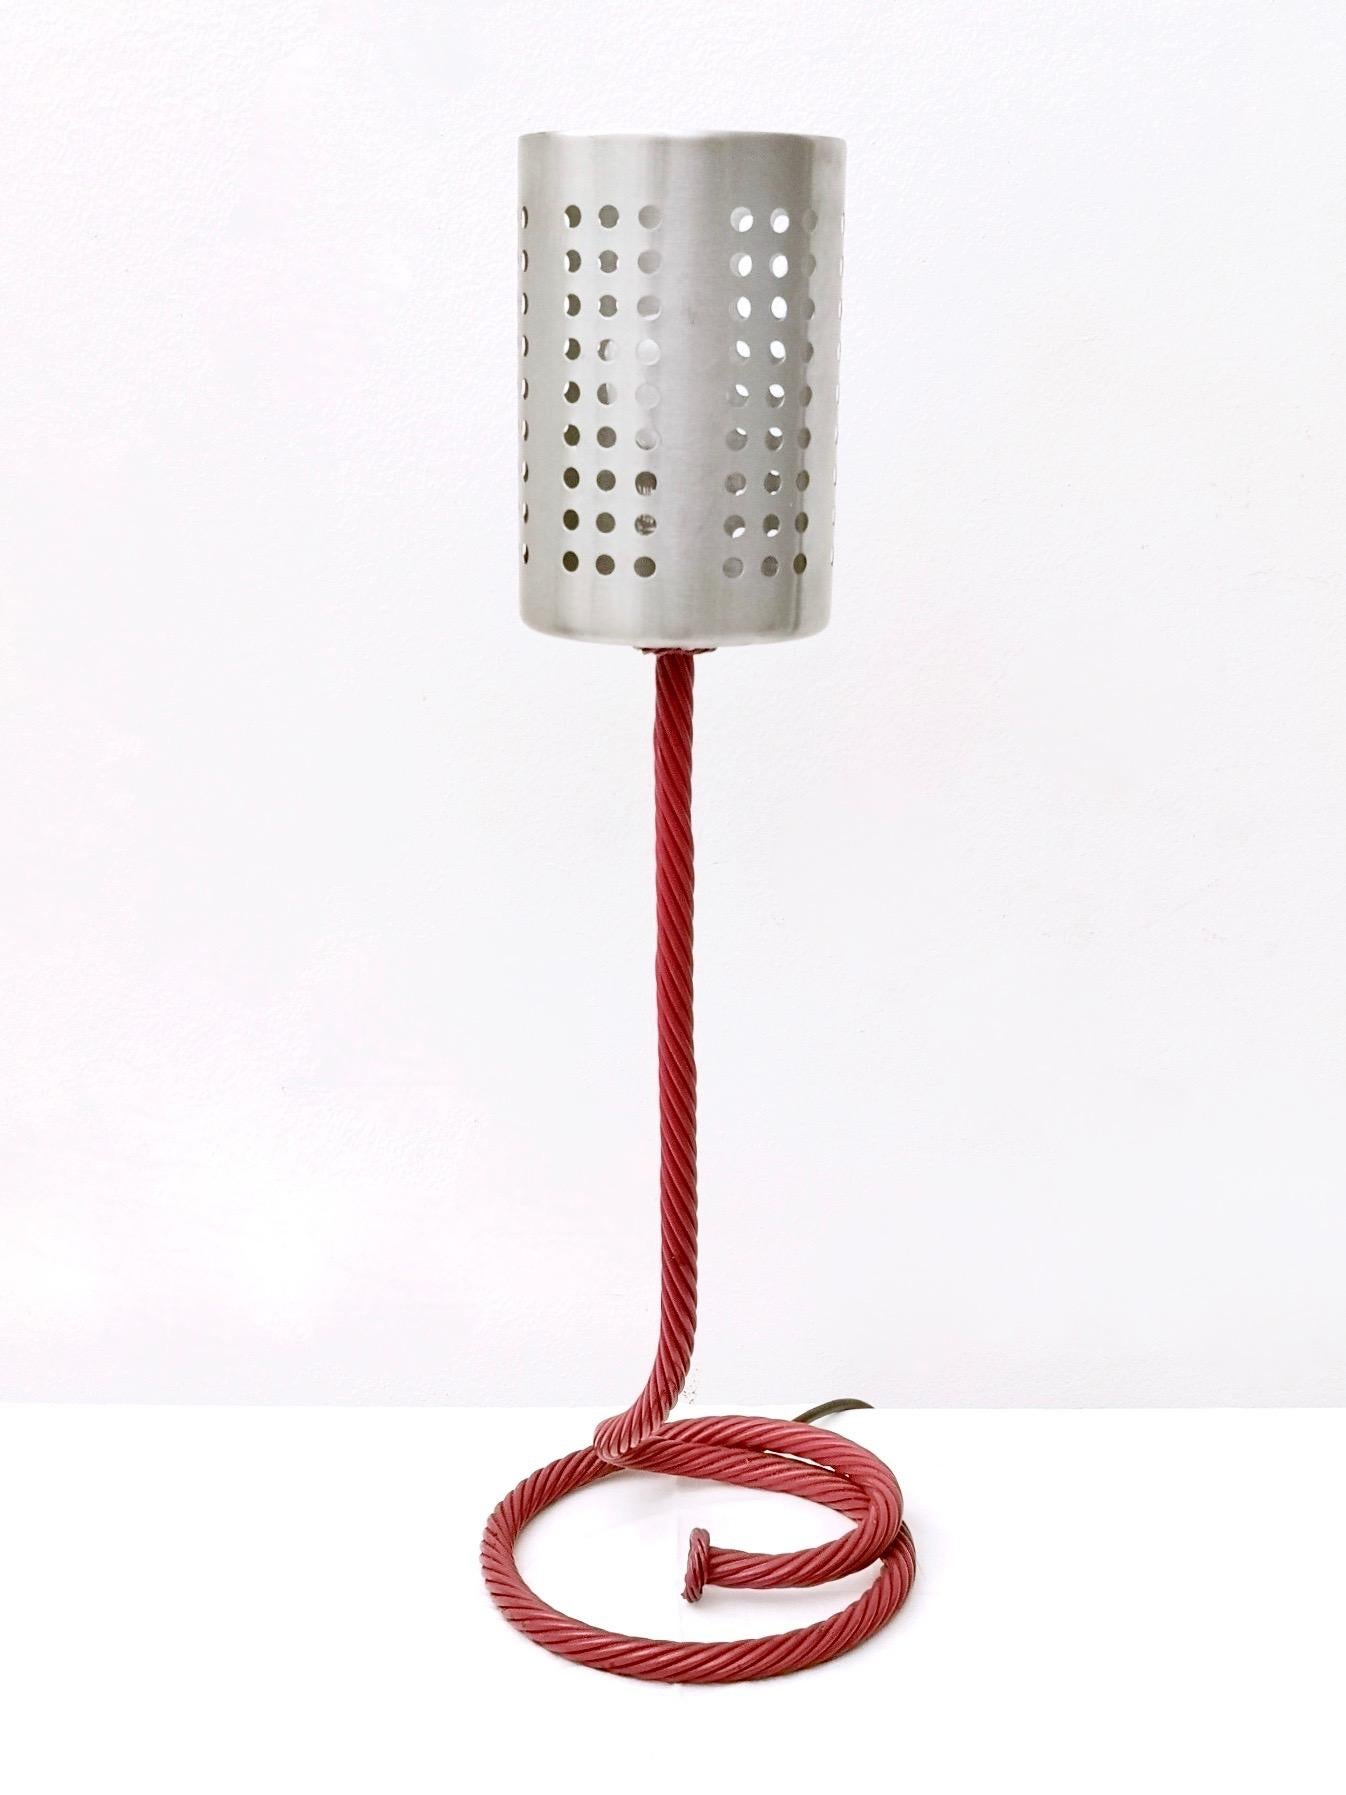 Italian Varnished Metal and Aluminum Table Lamp by Carmelo La Gaipa, Italy, 2019 For Sale